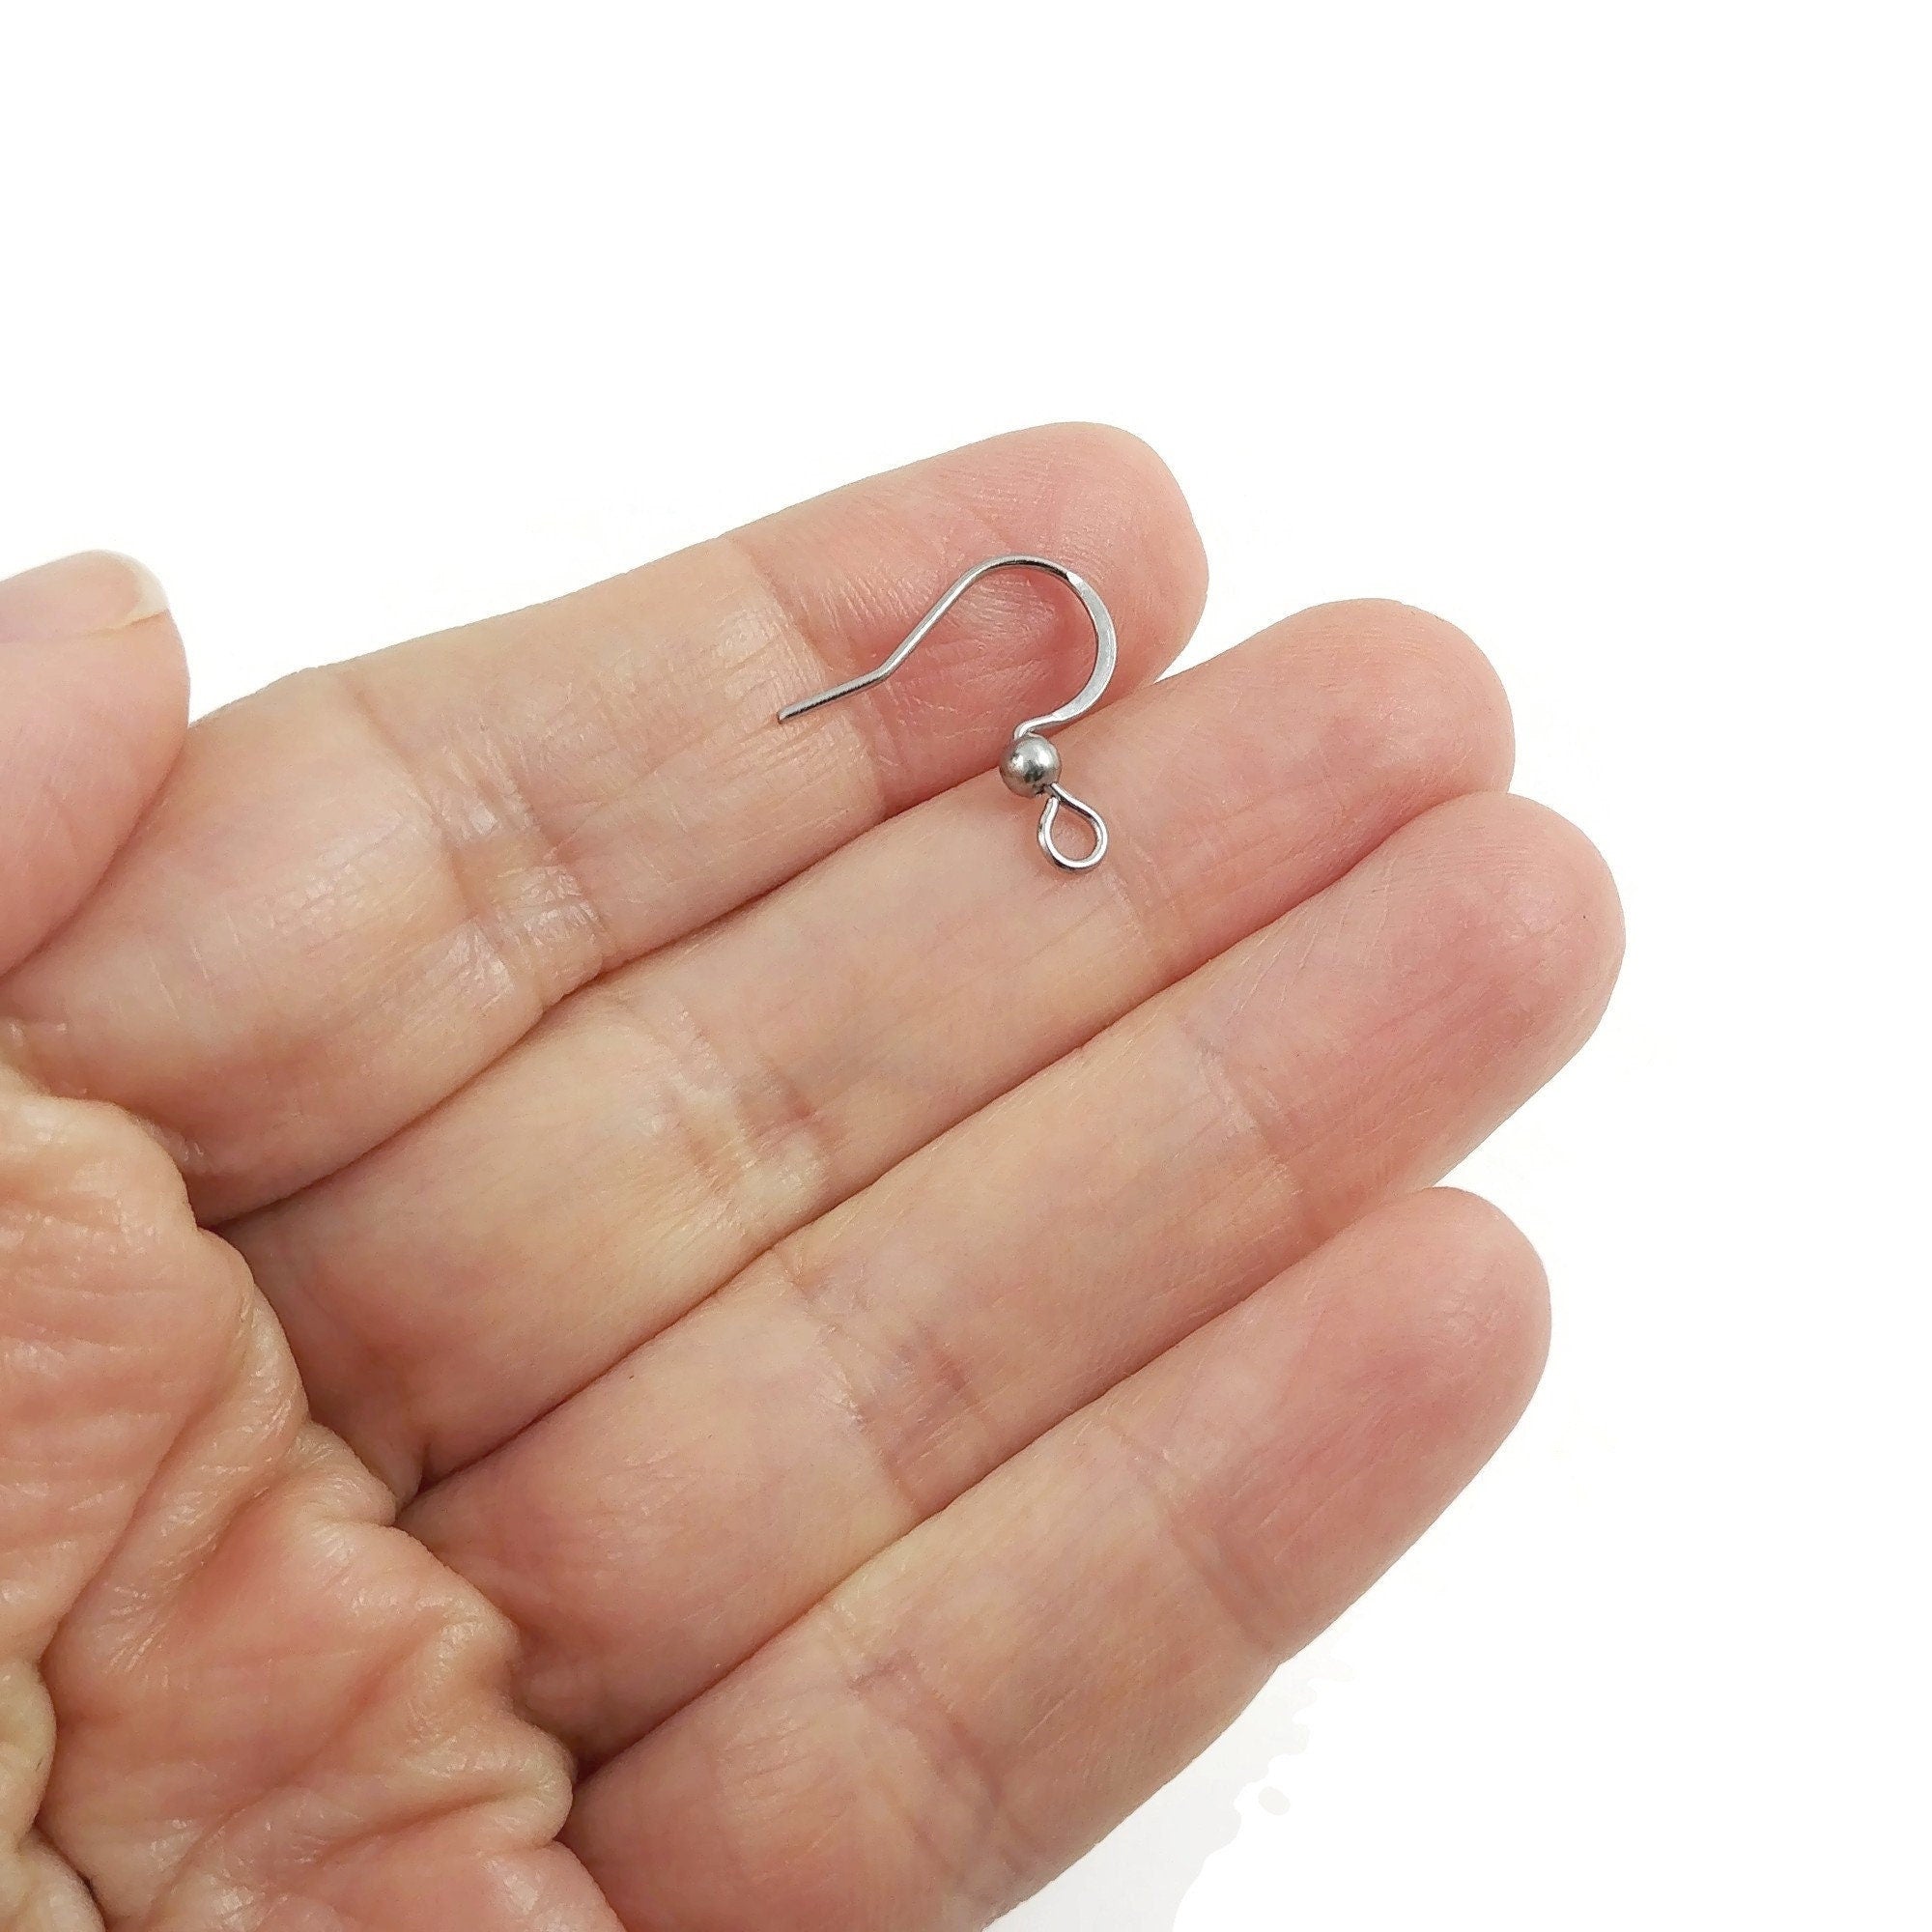 316 Surgical stainless steel ear wire, Flat french earring hooks, Hypoallergenic silver findings, Jewelry making